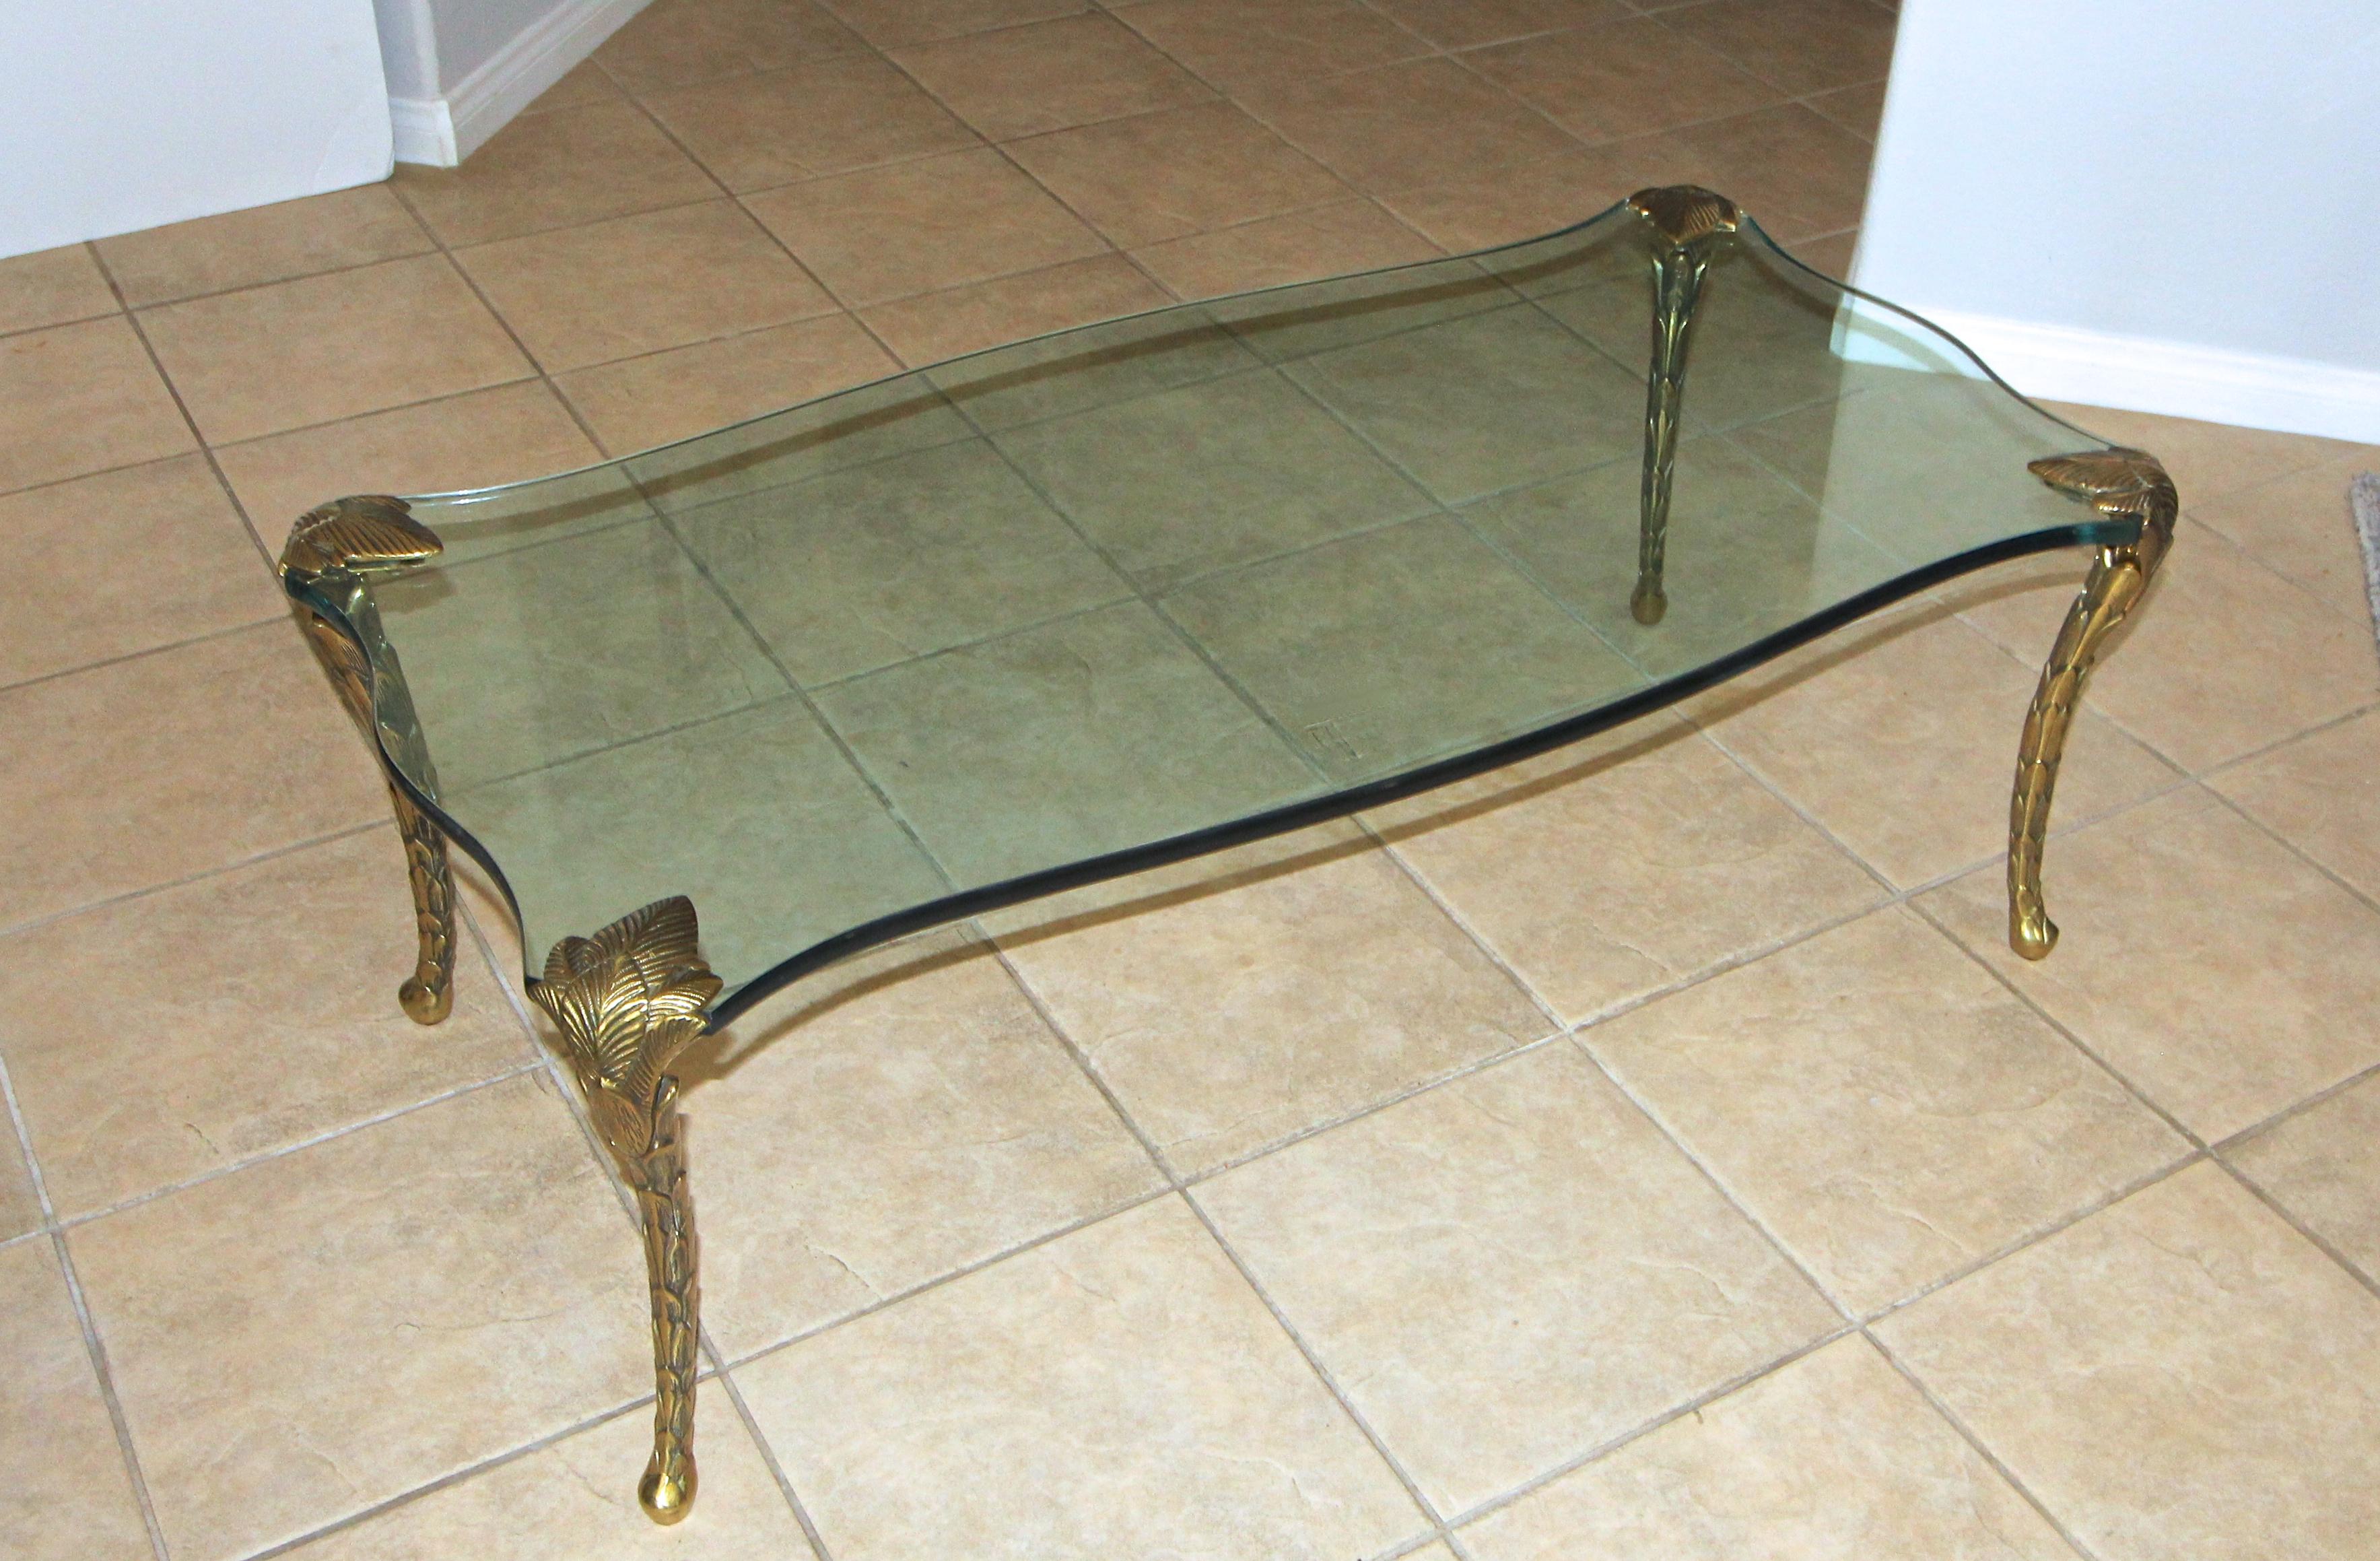 Thick serpentine shaped glass top, resting on four foliate cabriole brass or bronze legs coffee or cocktail table, attributed to Maision Charles.